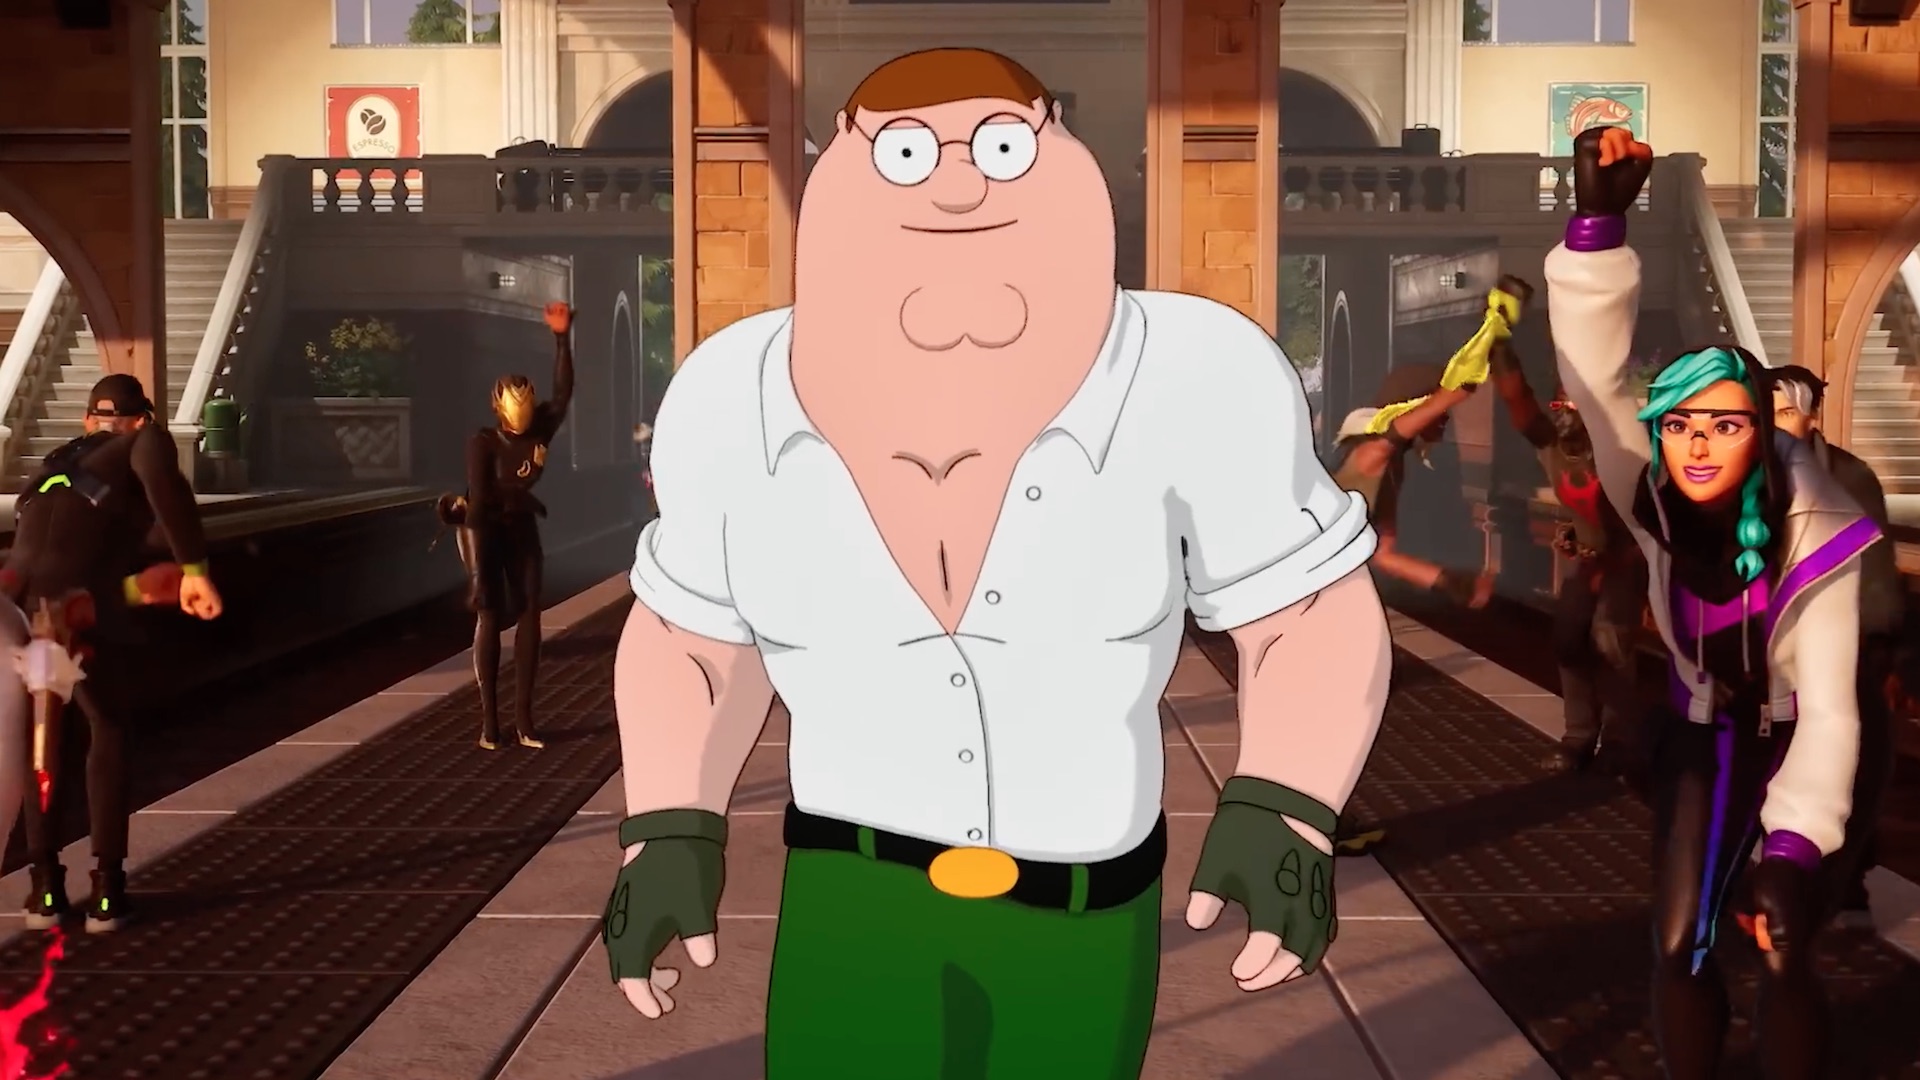 arkady svidrigailov recommends pictures of peter griffin from family guy pic